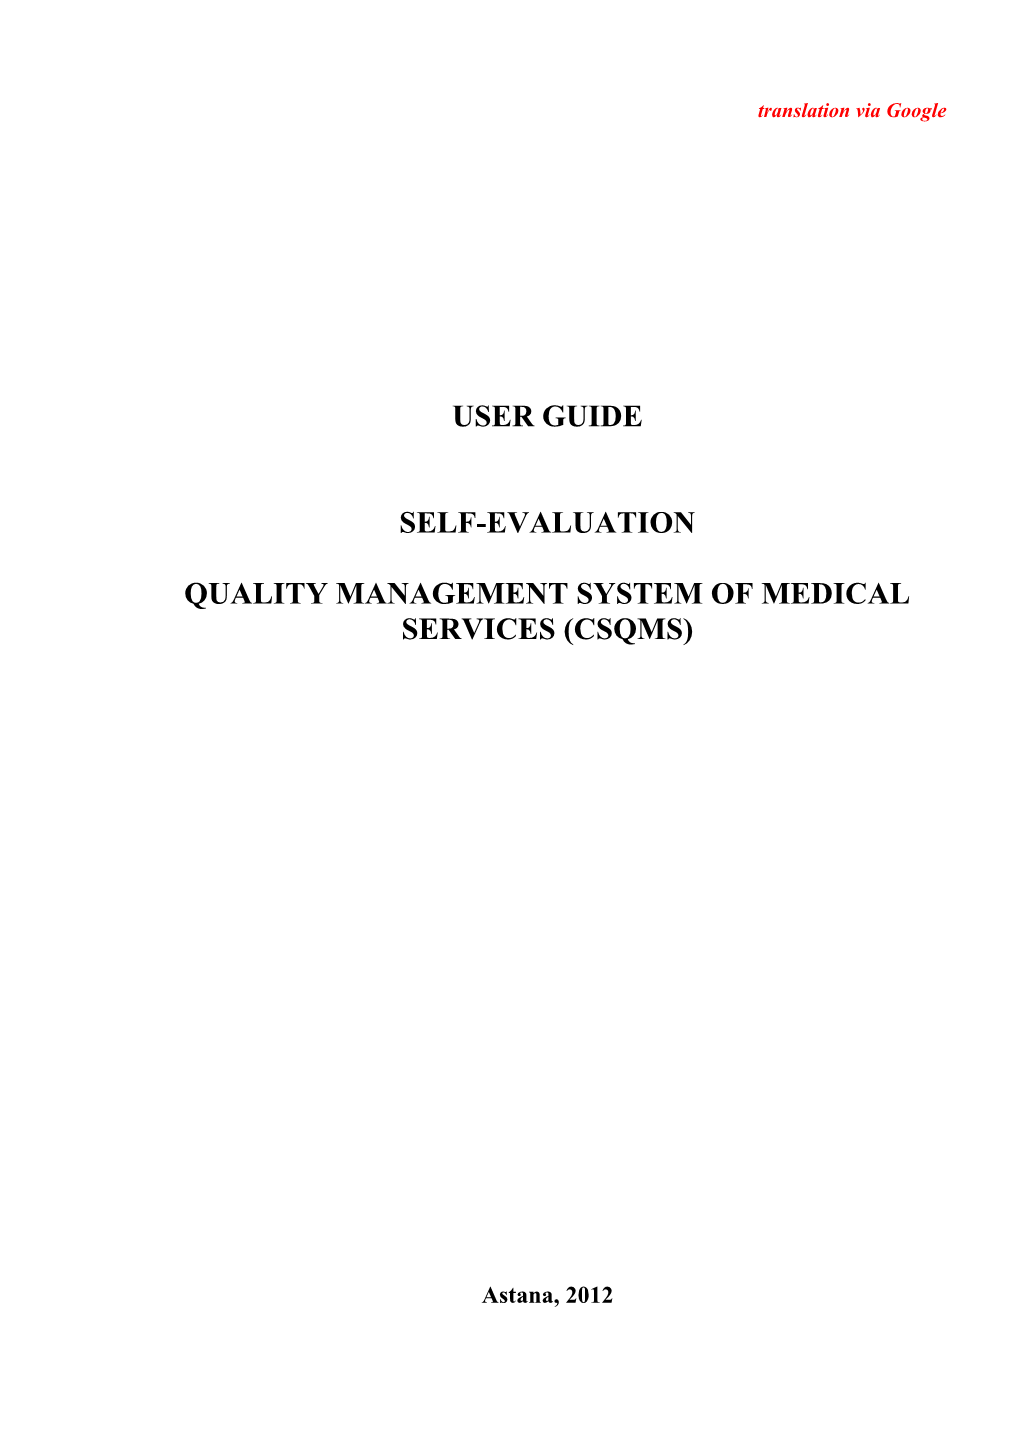 Quality Management System of Medical Services (Csqms)